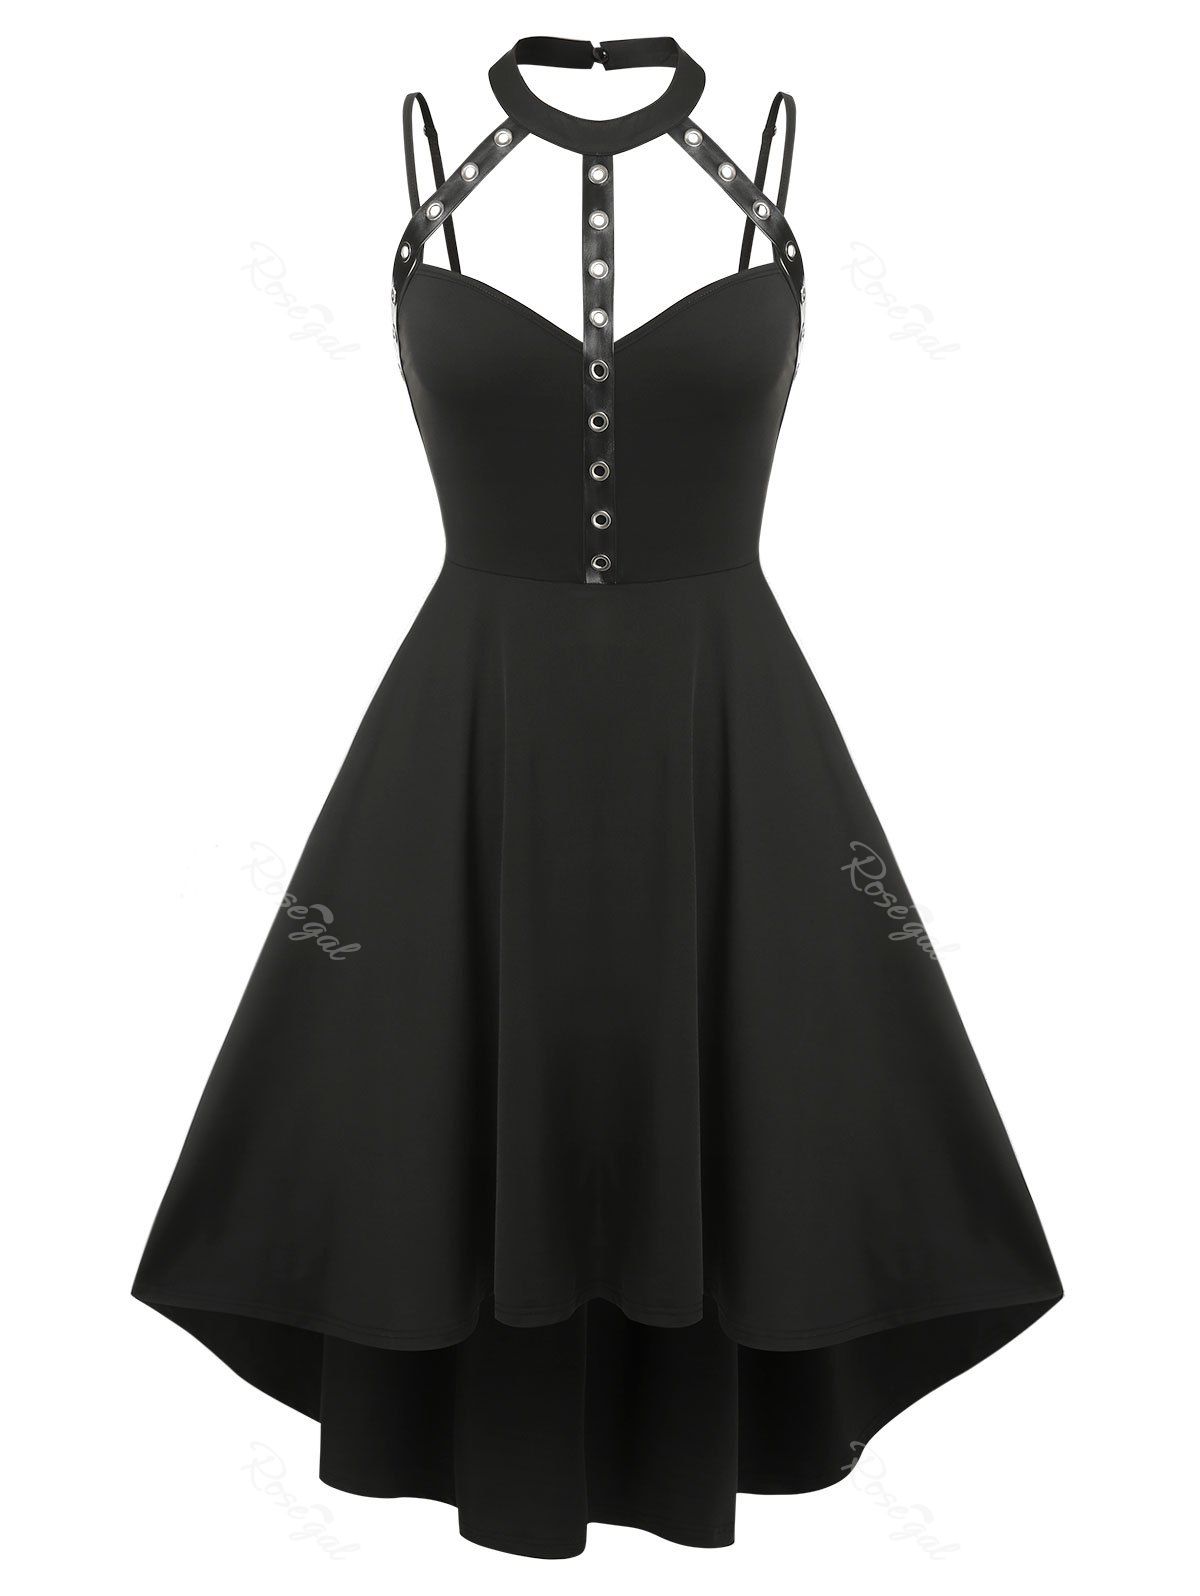 Latest Plus Size Harness Cutout High Low Gothic Dress  